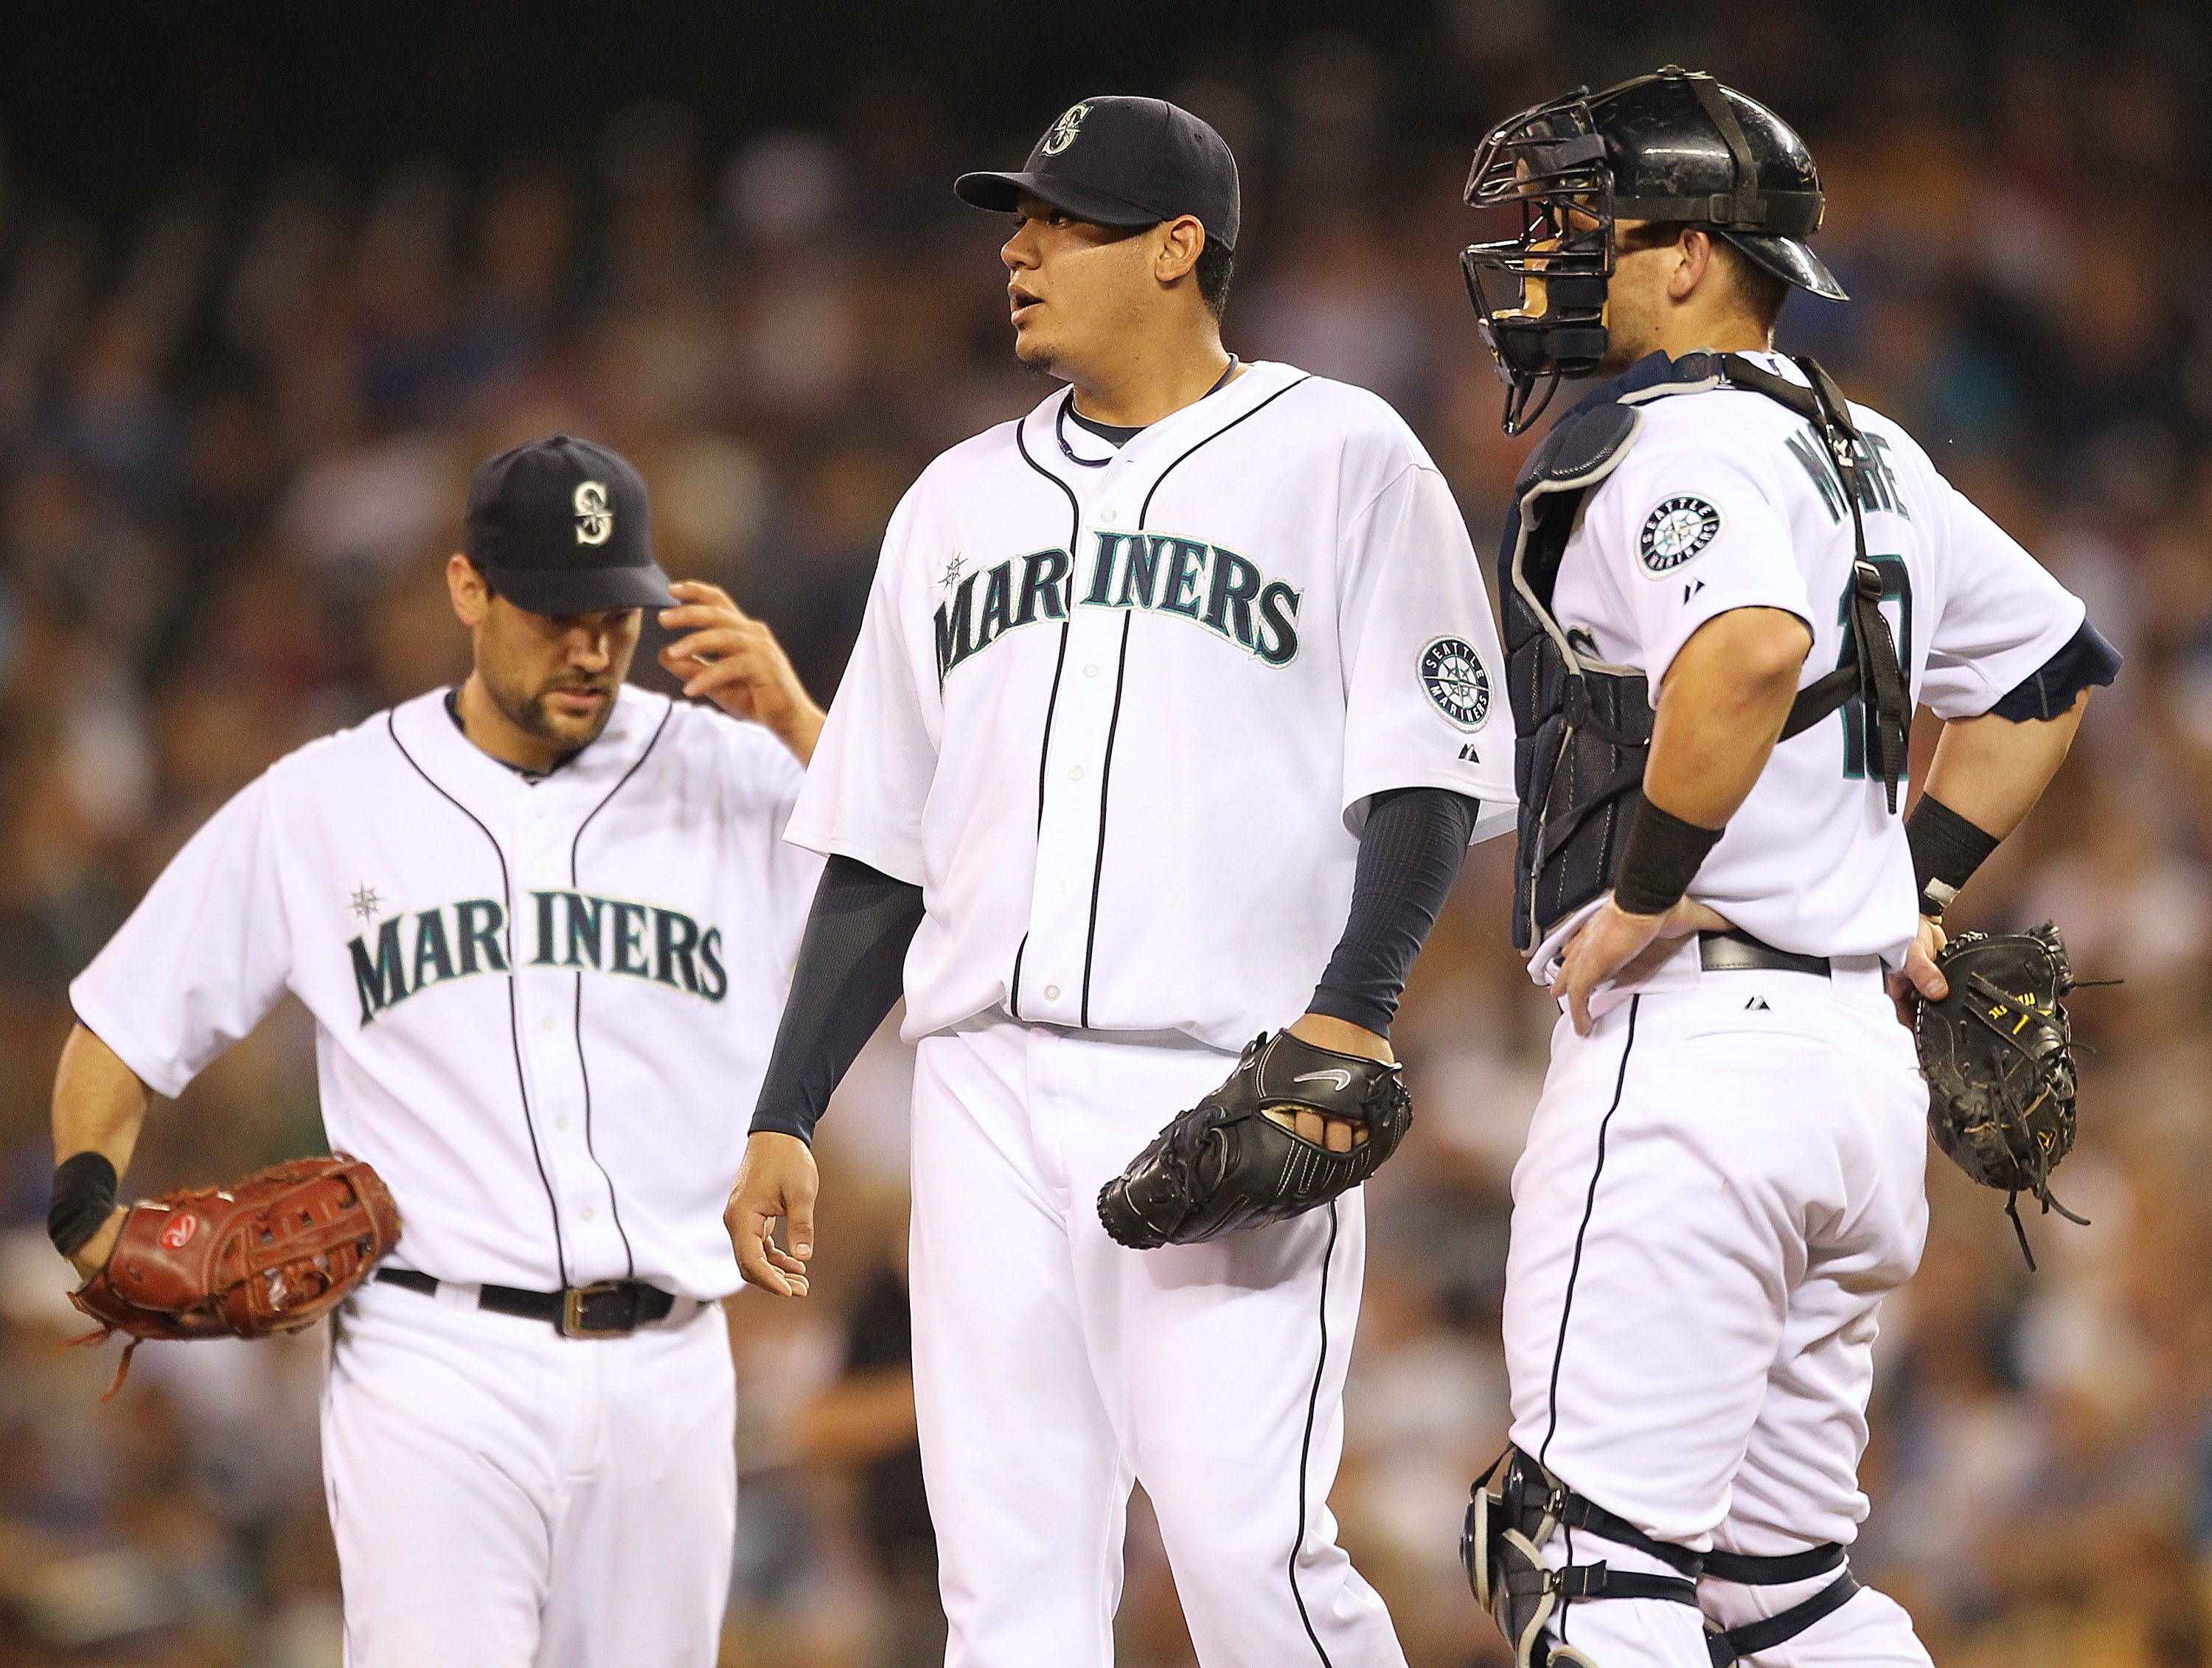 SEATTLE - AUGUST 05:  Starting pitcher Felix Hernandez #34 of the Seattle Mariners pauses just before being removed from the game as first baseman Casey Kotchman #13 and catcher Adam Moore #10 look on in the seventh inning against the Texas Rangers at Saf